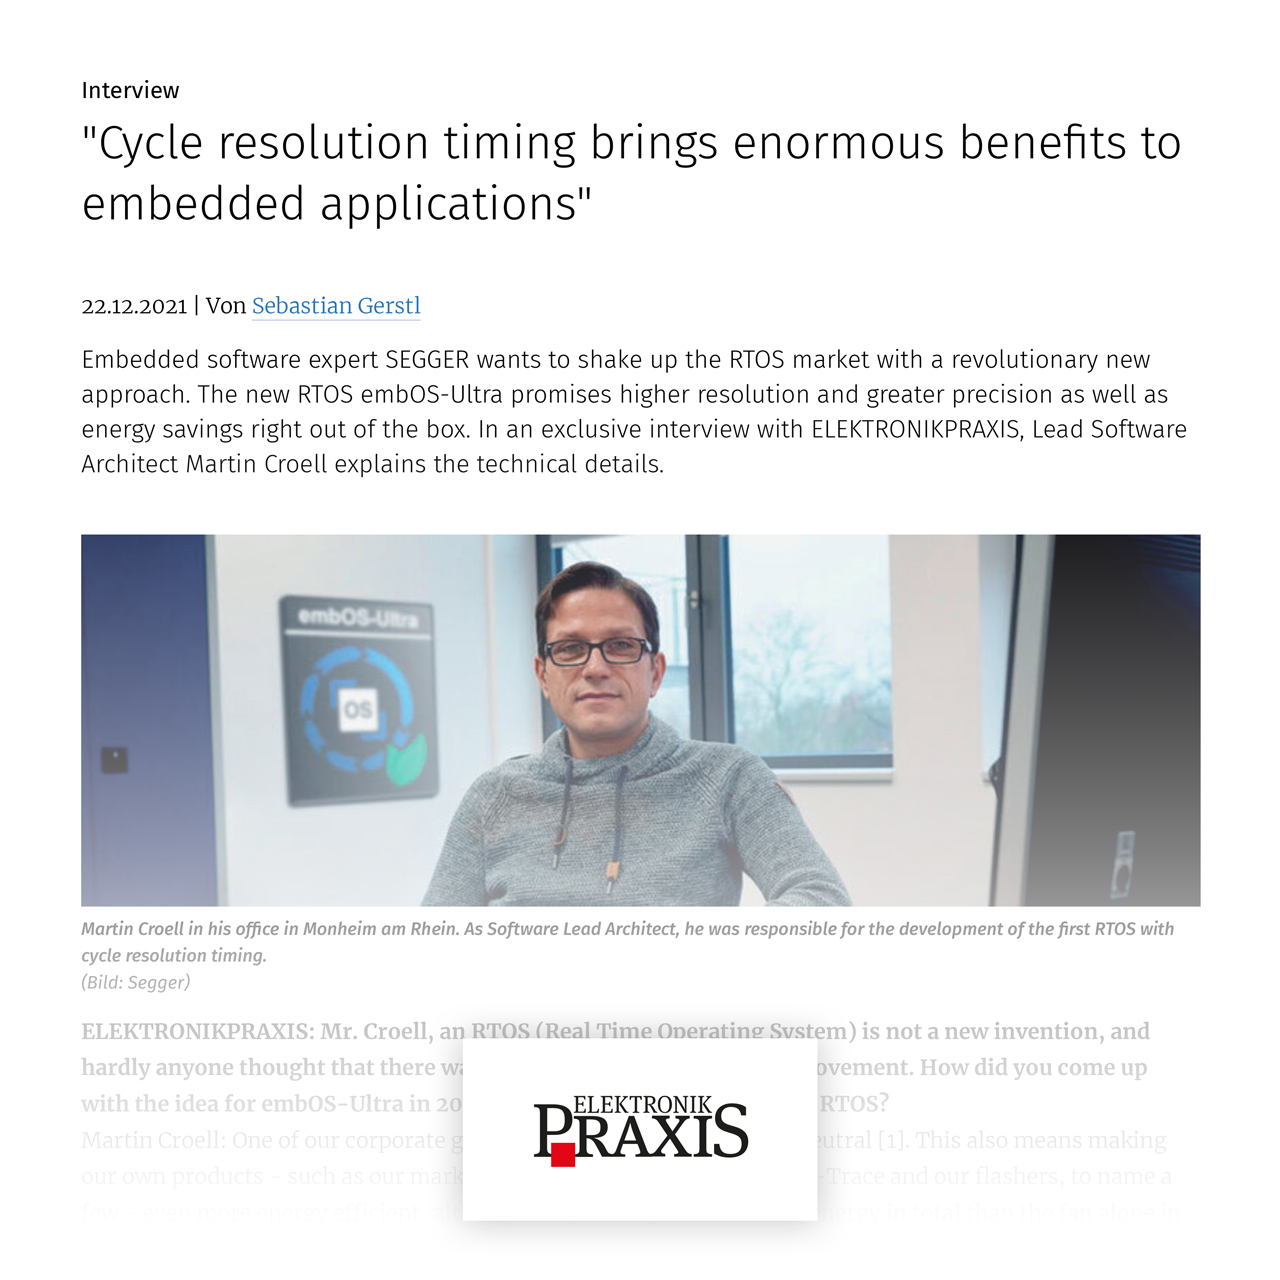 SEGGER Press: Cycle-resolution Timing brings enormous benefits to embedded applications